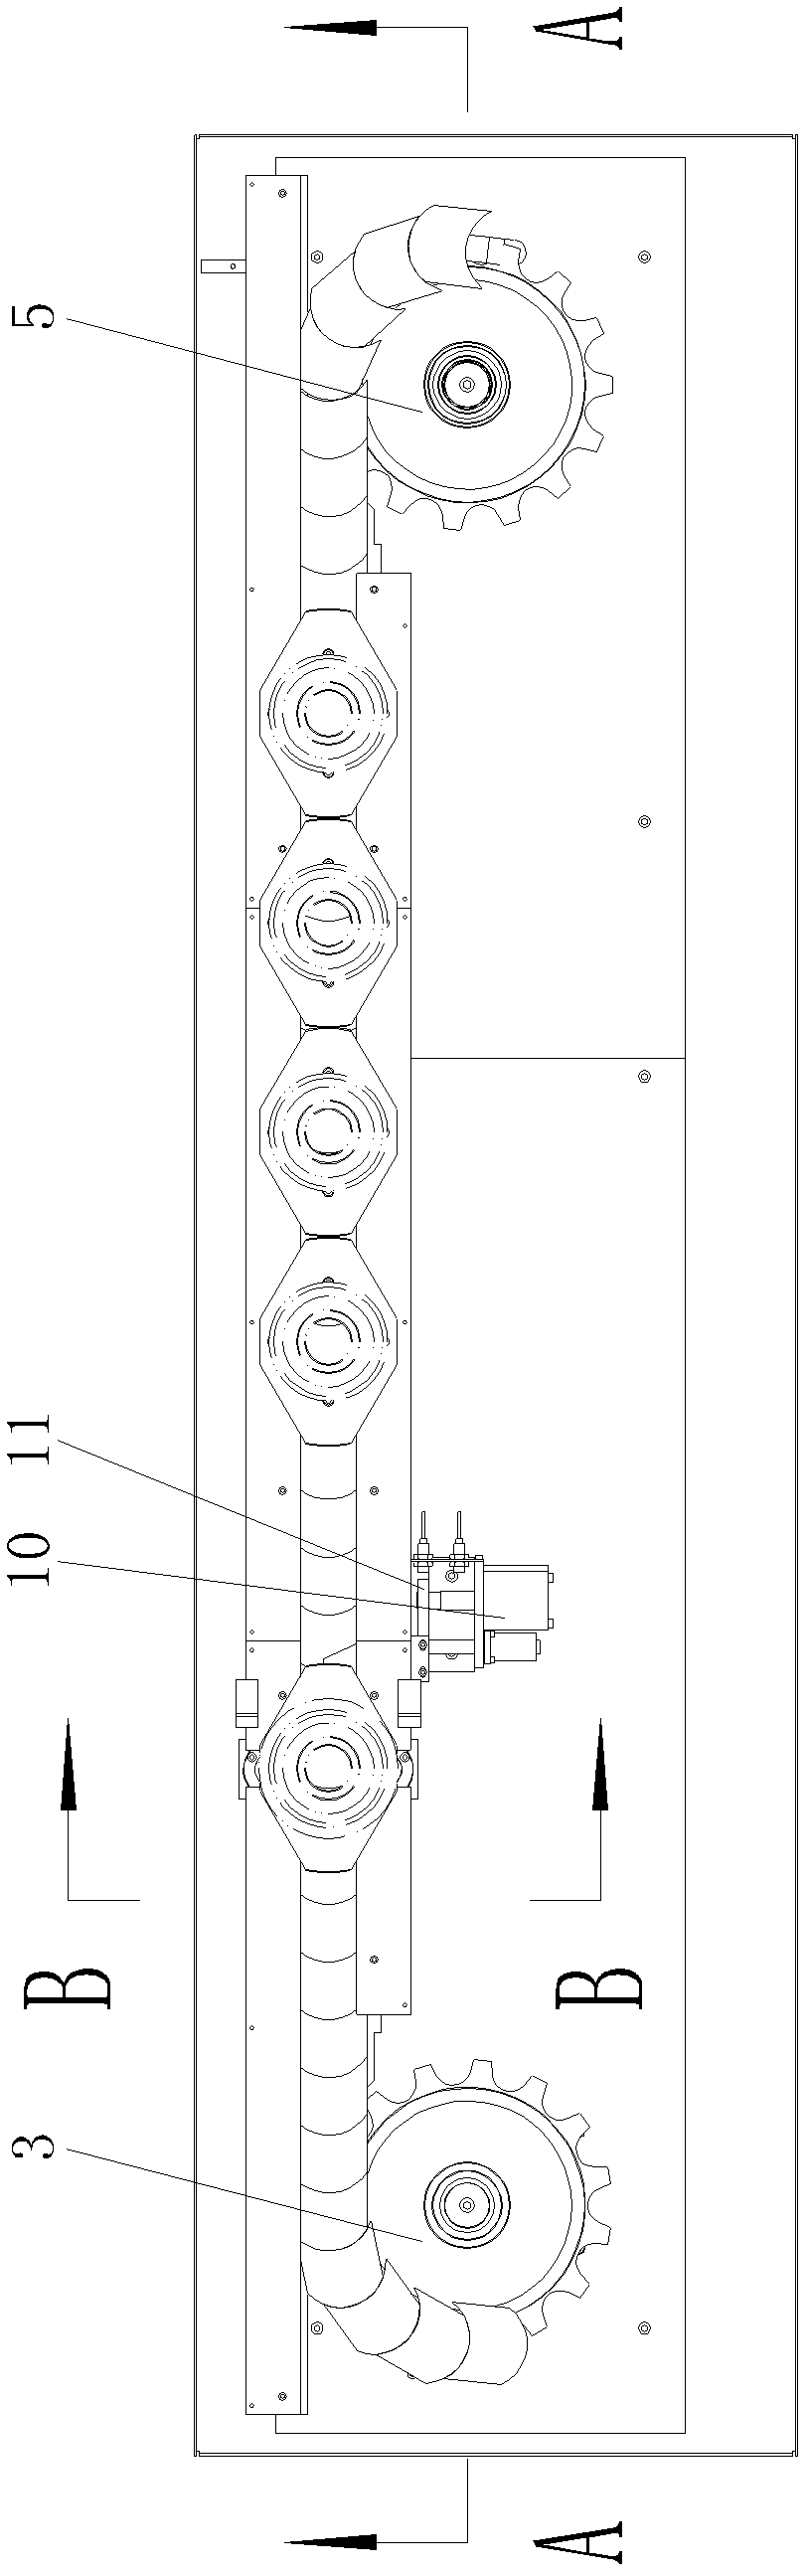 Loading and unloading transmission device for machine tool